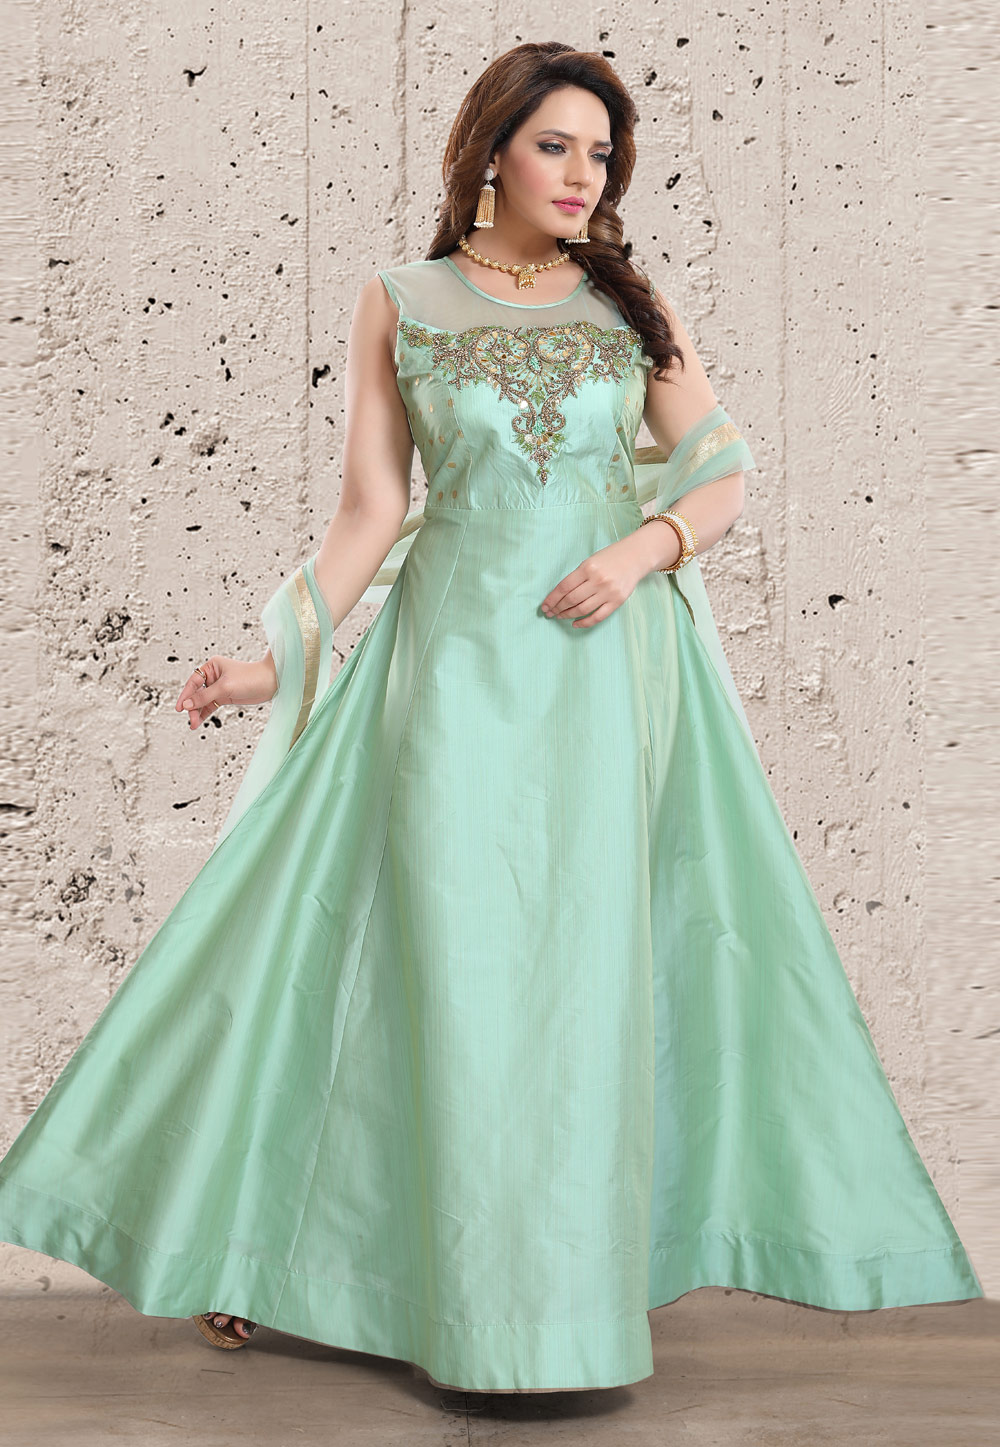 Enchanting Emerald: The Green Off Shoulder Gown - Embrace Timeless Glamour